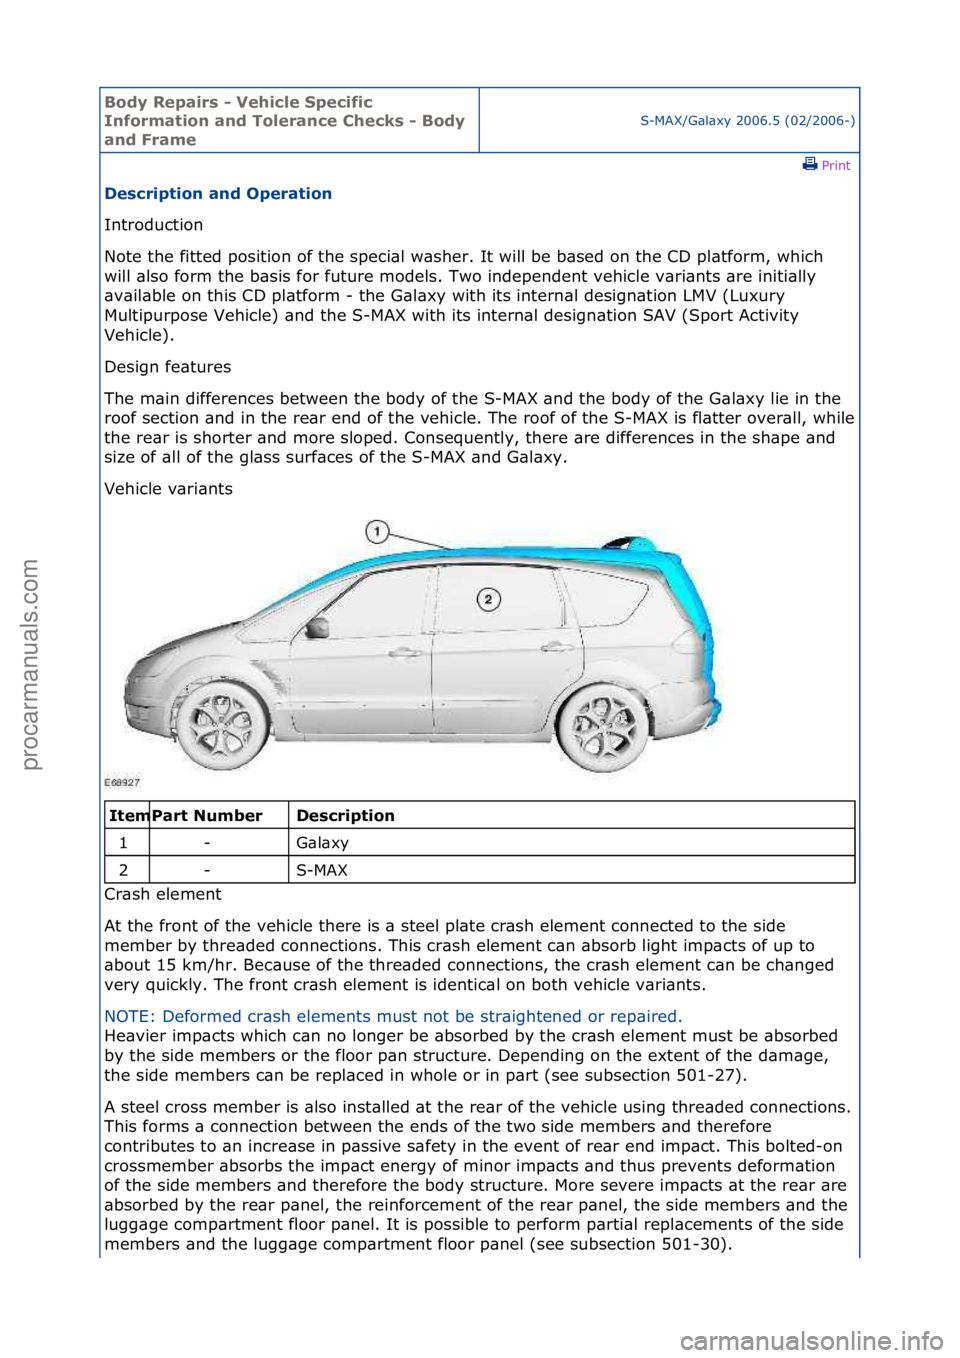 FORD GALAXY 2006  Service Repair Manual Body Re\bair\f - Vehicle S\becific 
Information and Tolerance Check\f - Body 
and Frame
S-MAX/G\bl\bxy\f2006.5\f(02/2006-)\fPrint \f
De\fcri\btion and O\beration 
Introduction\f
No

te\fthe\ffitted\fp